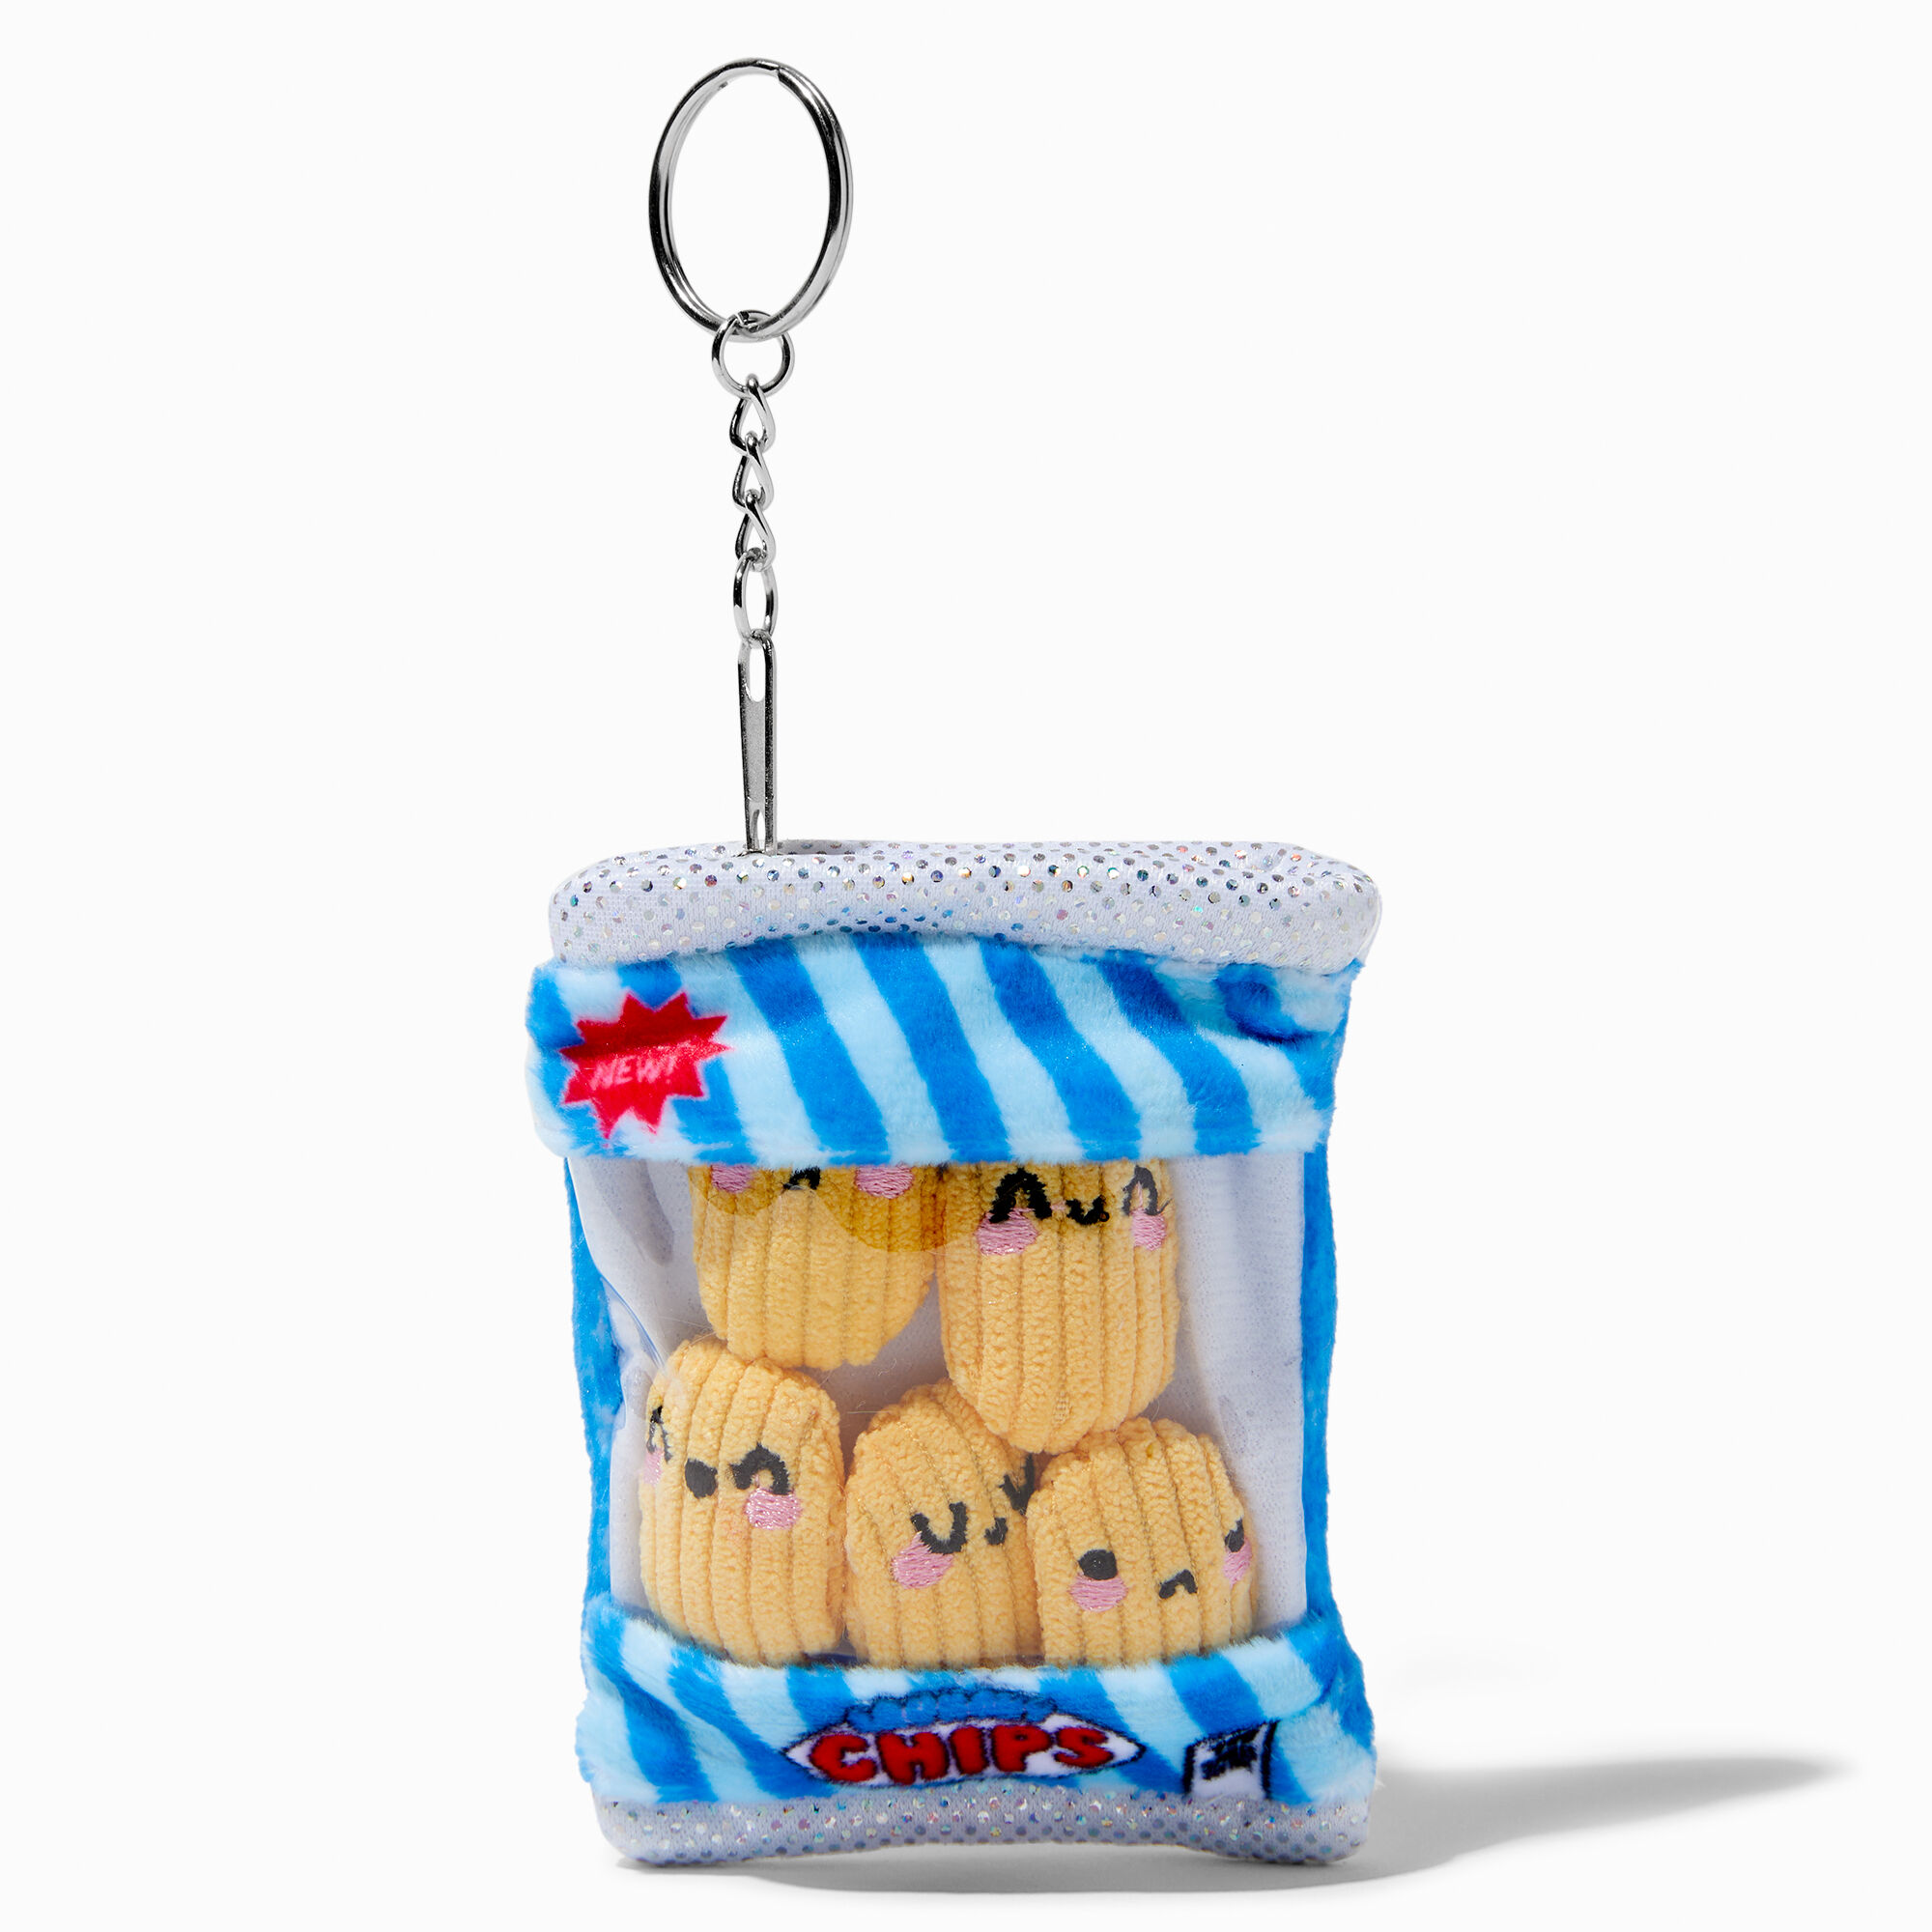 View Claires Chips Keychain Pouch information